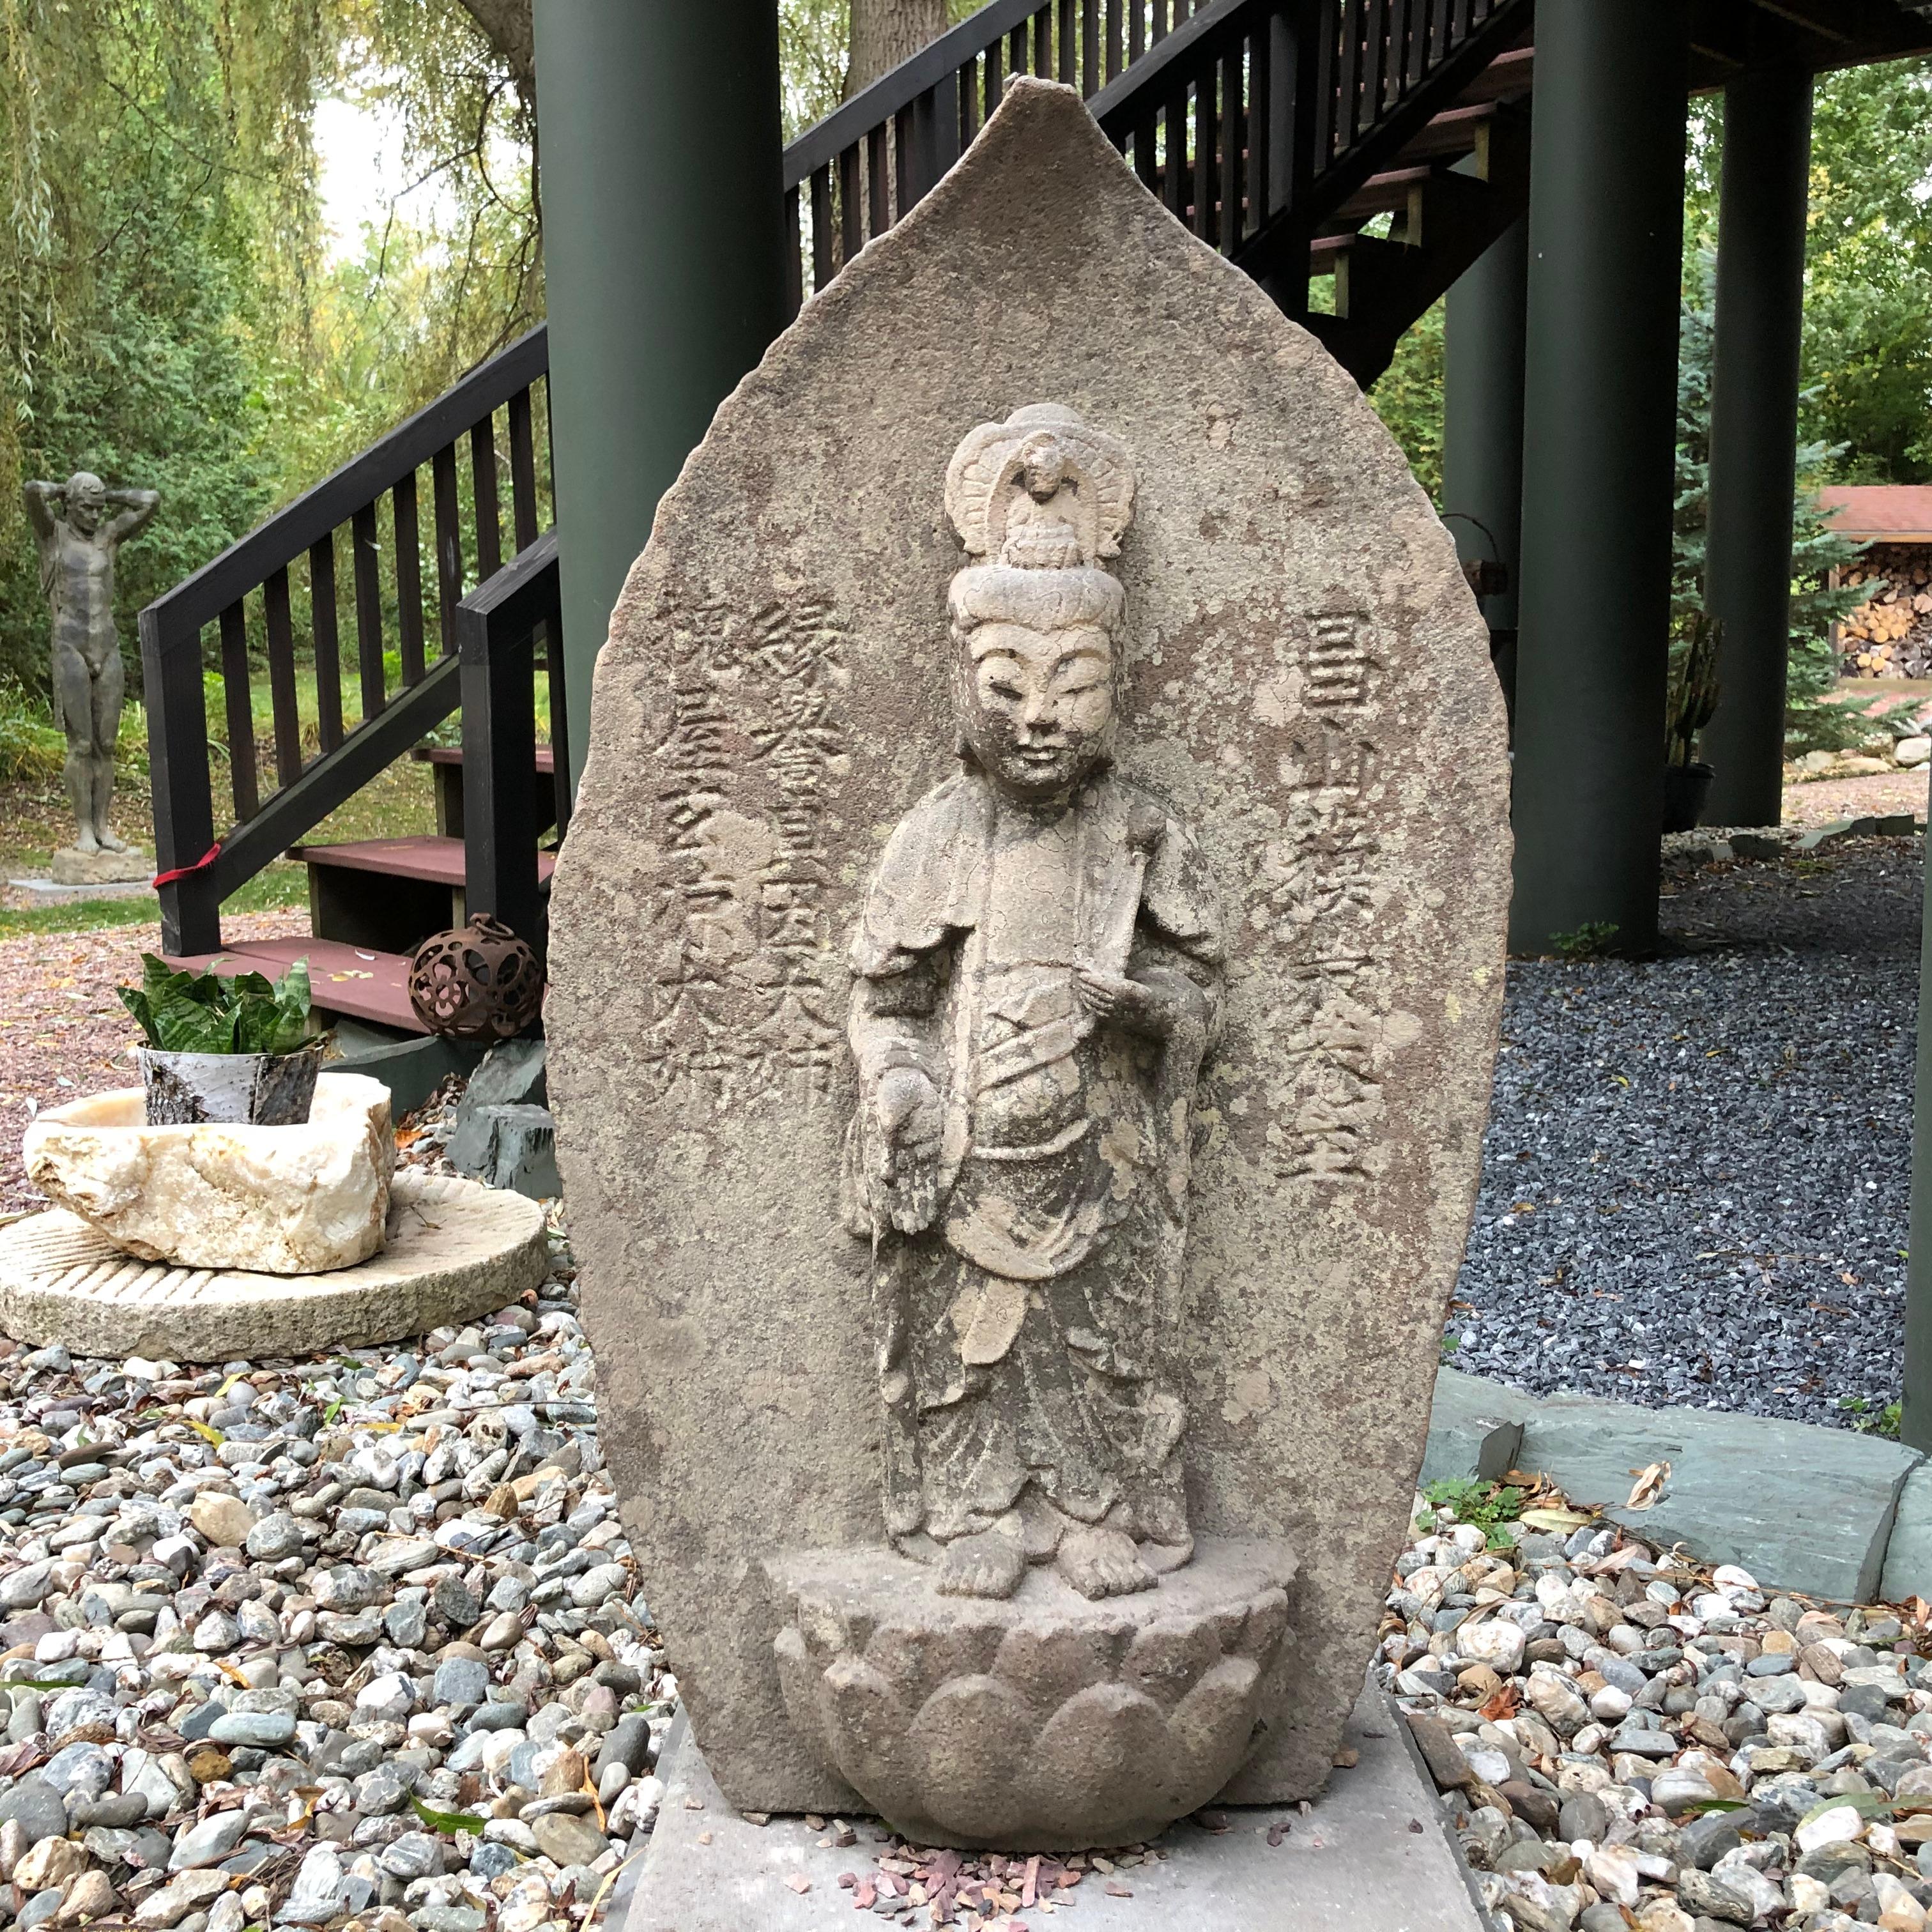 From our recent Japanese Acquisitions Travels

An early, large and hard to find Japanese hand carved stone Kanon Guan Yin carved in dan over all organic leaf form and in a mudra of compassion while clutching a holy flower stem. She has been